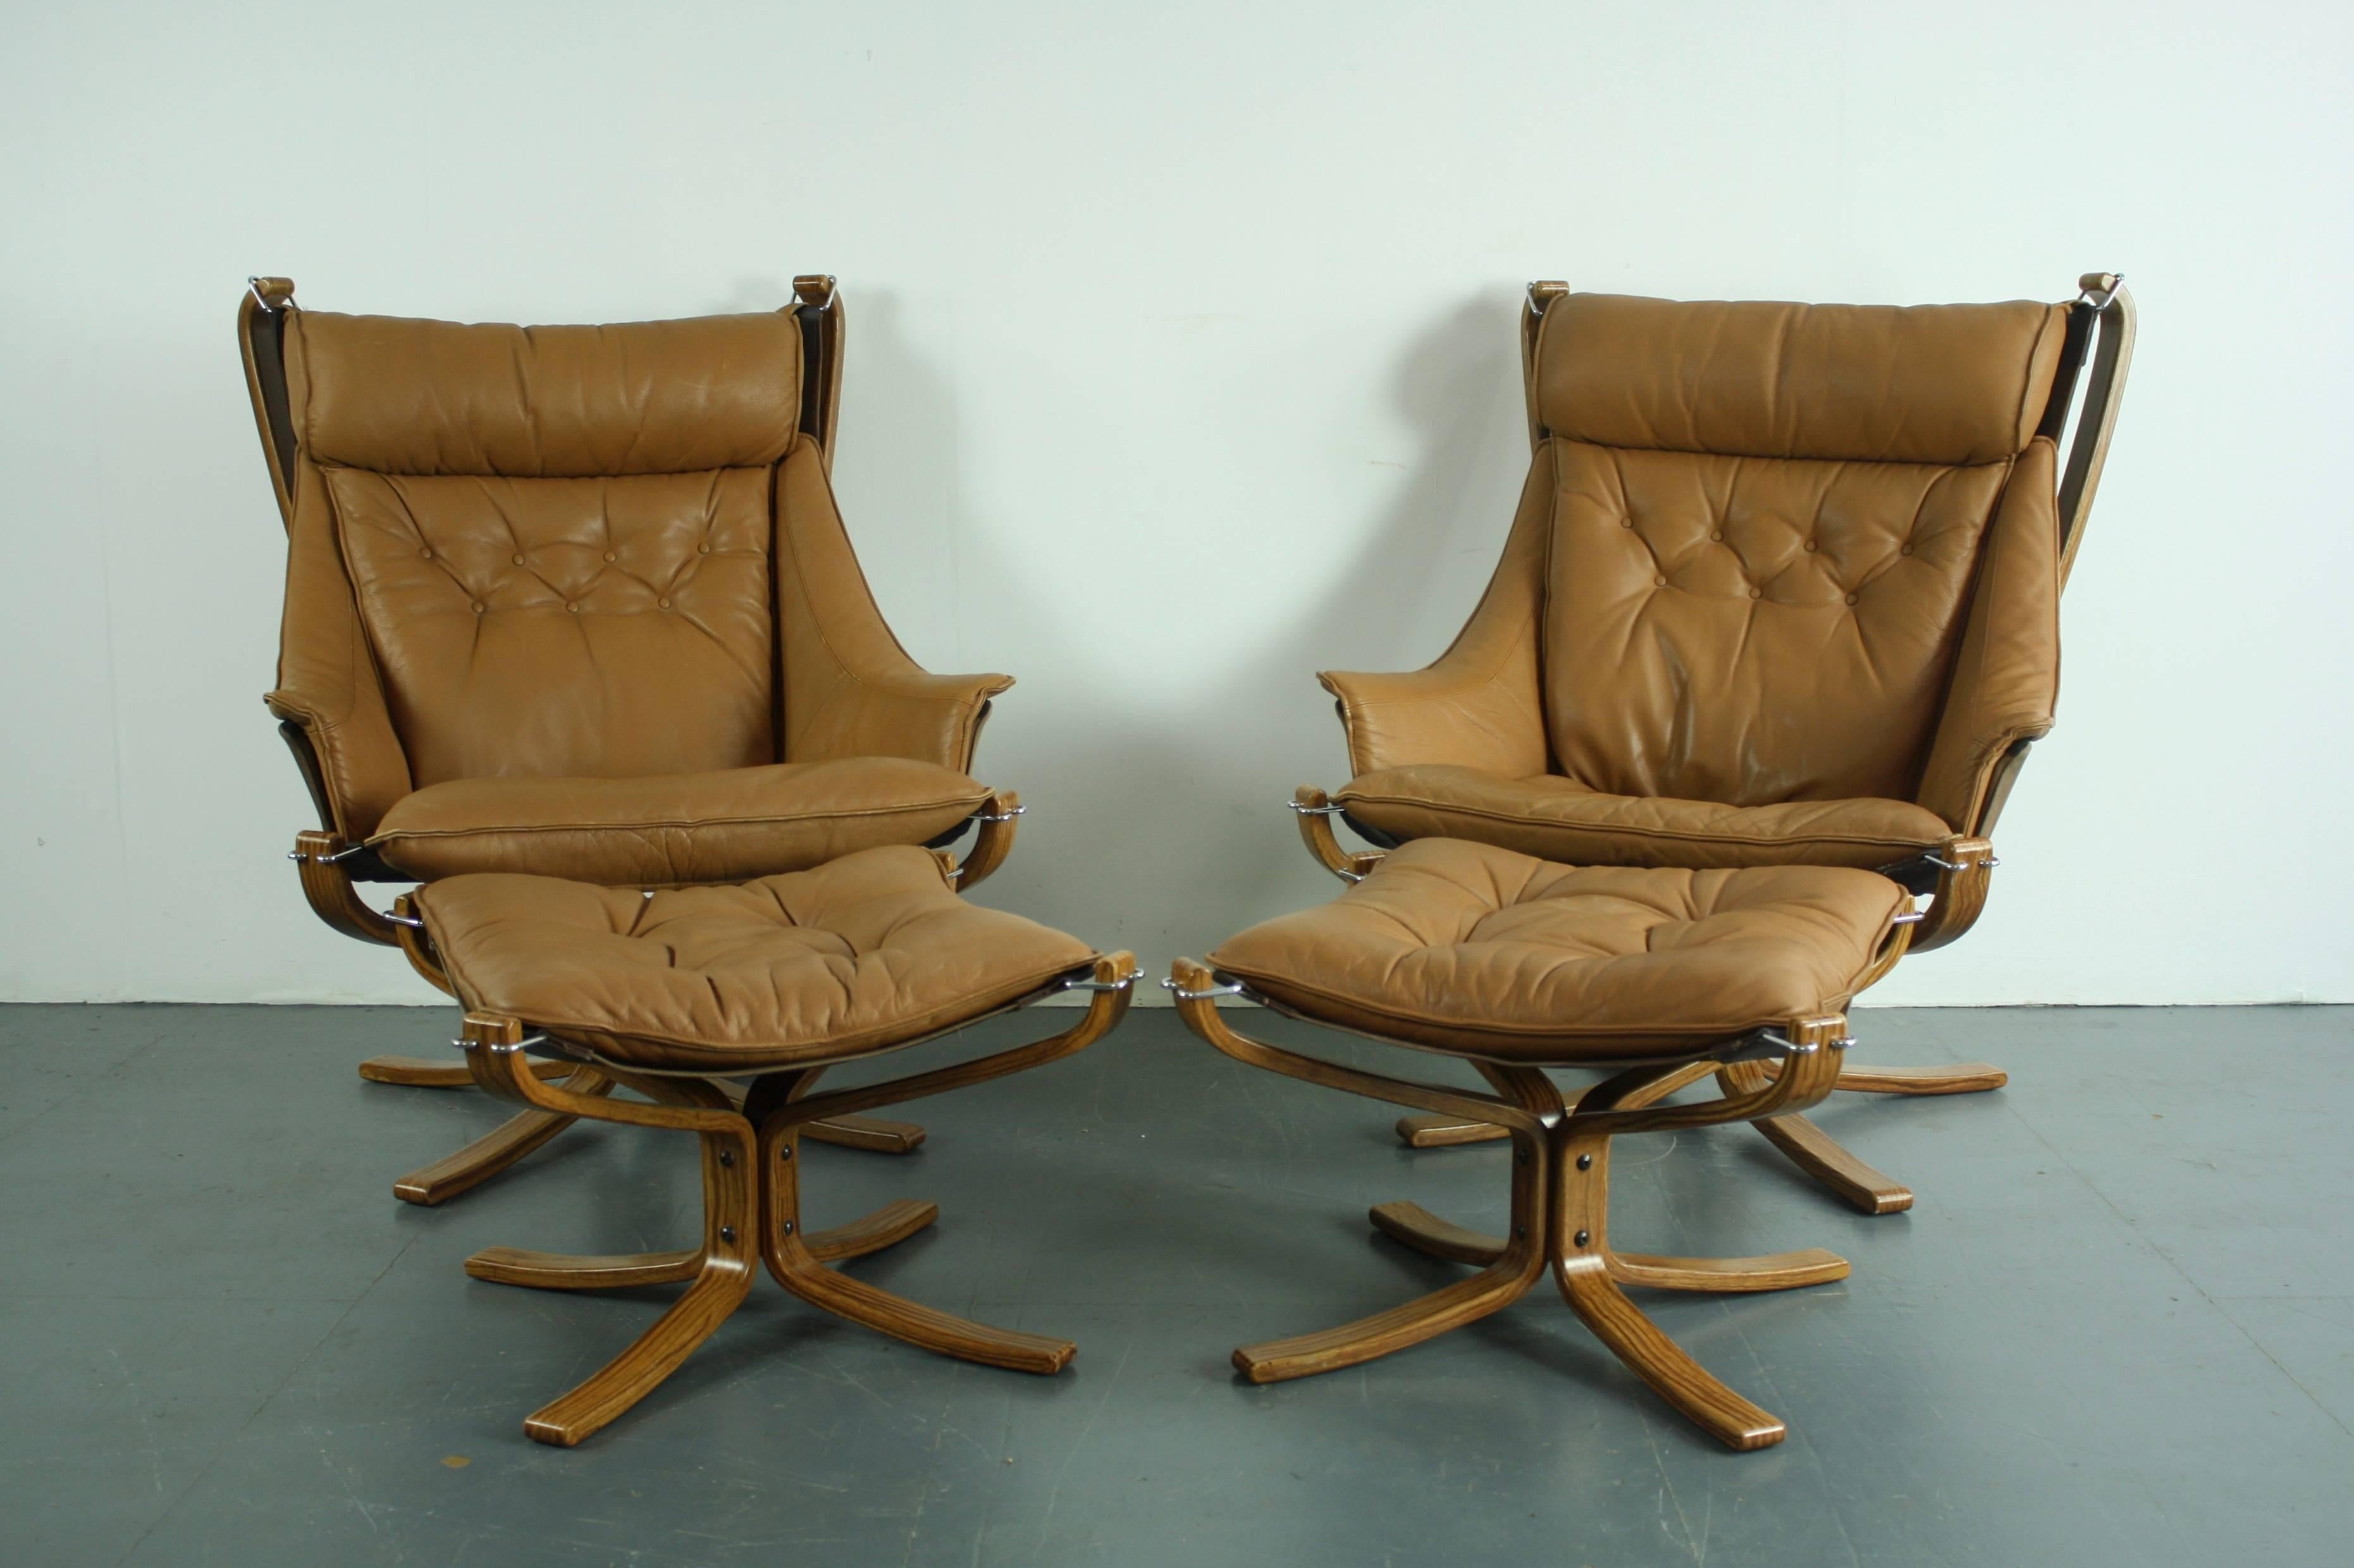 Vintage Camel Leather Rosewood Framed High Backed Winged Falcon Chair & Ottoman For Sale 3